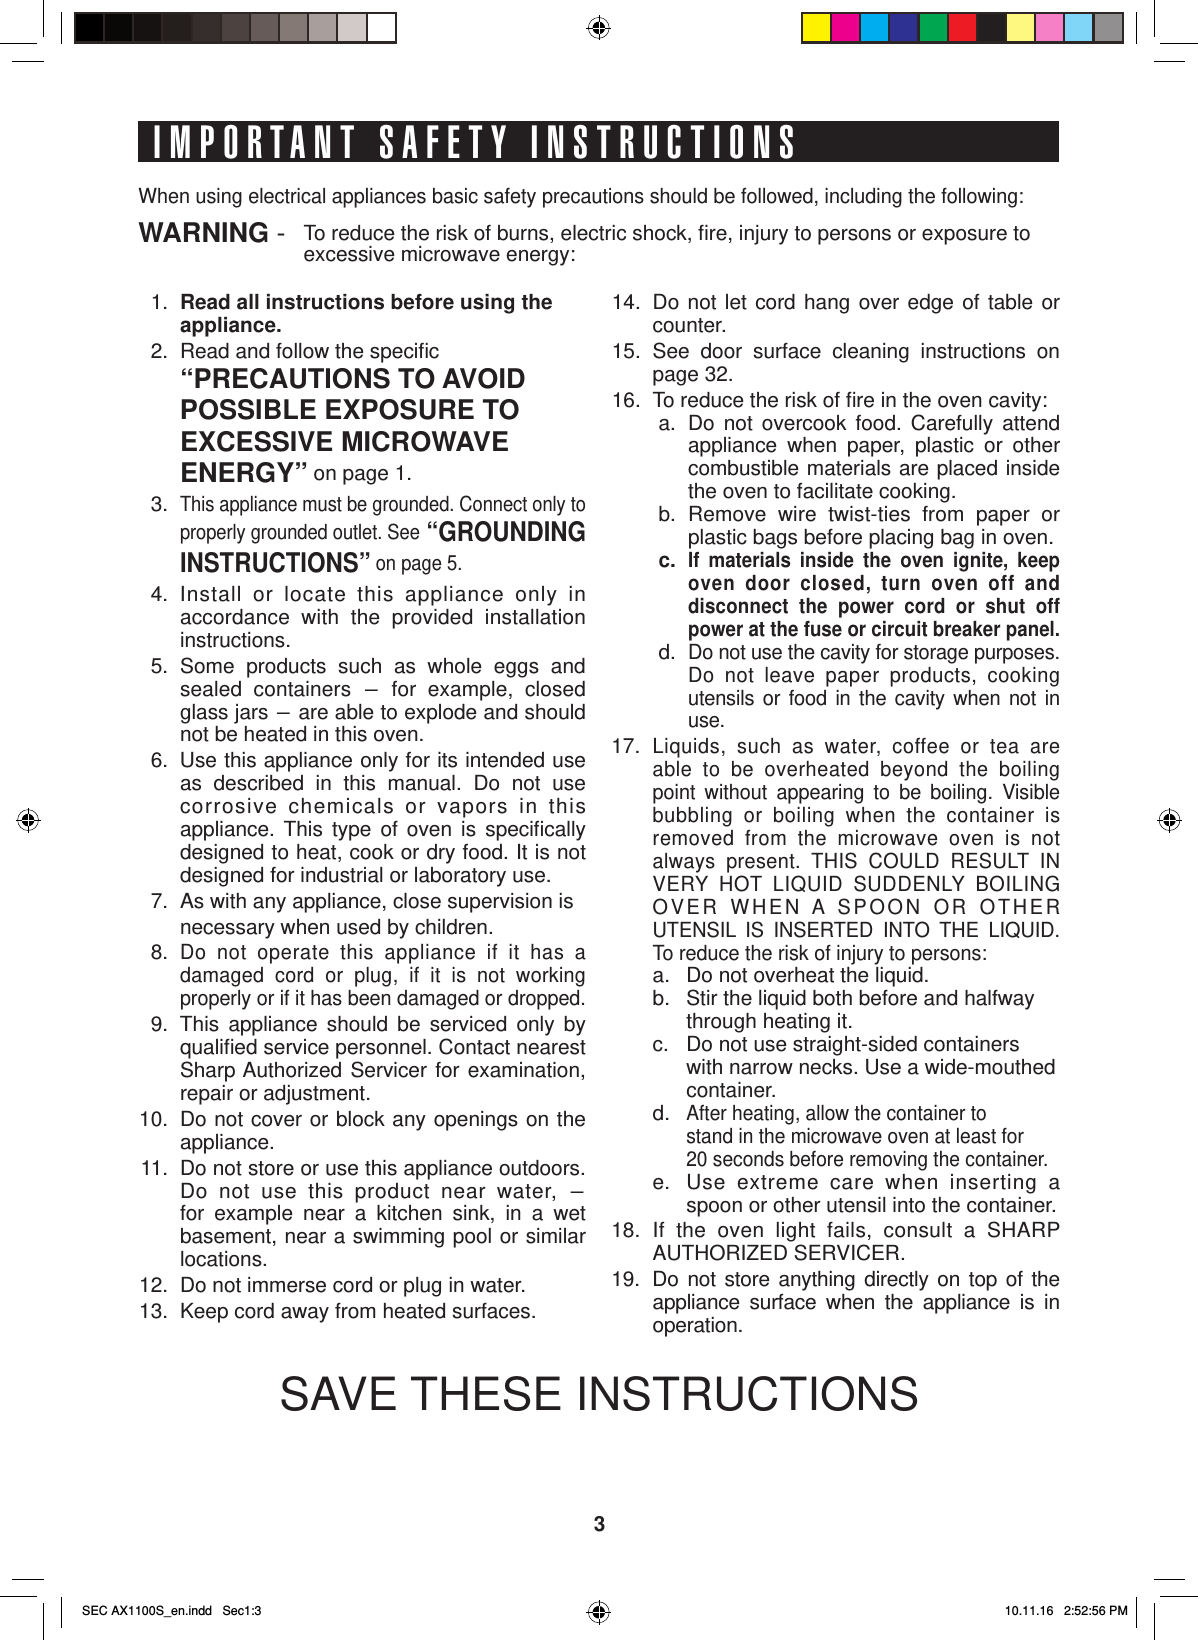 3IMPORTANT SAFETY INSTRUCTIONS 1. Read all instructions before using the  appliance.  2.  Read and follow the speciﬁ c  “PRECAUTIONS TO AVOID     POSSIBLE EXPOSURE TO   EXCESSIVE MICROWAVE   ENERGY” on page 1. 3.  This appliance must be grounded. Connect only to properly grounded outlet. See “GROUNDING INSTRUCTIONS” on page 5. 4.  Install or locate this appliance only in accordance with the provided installation instructions. 5.  Some products such as whole eggs and sealed containers - for example, closed glass jars - are able to explode and should not be heated in this oven.  6.  Use this appliance only for its intended use as described in this manual. Do not use       corrosive chemicals or vapors in this appliance. This type of oven is speciﬁ cally           designed to heat, cook or dry food. It is not designed for industrial or laboratory use.  7.  As with any appliance, close supervision is     necessary when used by children. 8.  Do not operate this appliance if it has a damaged cord or plug, if it is not working properly or if it has been damaged or dropped.  9.  This appliance should be serviced only by qualiﬁ ed service personnel. Contact nearest Sharp Authorized Servicer for examination, repair or adjustment. 10.  Do not cover or block any openings on the appliance. 11.  Do not store or use this appliance outdoors. Do not use this product near water, - for example near a kitchen sink, in a wet basement, near a swimming pool or similar locations. 12.  Do not immerse cord or plug in water. 13.  Keep cord away from heated surfaces.When using electrical appliances basic safety precautions should be followed, including the following:WARNING -  To reduce the risk of burns, electric shock, ﬁ re, injury to persons or exposure to  excessive microwave energy: 14.  Do not let cord hang over edge of table or counter. 15.  See door surface cleaning instructions on page 32. 16.  To reduce the risk of ﬁ re in the oven cavity:a.  Do not overcook food. Carefully attend appliance when paper, plastic or other combustible materials are placed inside the oven to facilitate cooking.b.  Remove wire twist-ties from paper or plastic bags before placing bag in oven.c.  If materials inside the oven ignite, keep oven door closed, turn oven off and disconnect the power cord or shut off power at the fuse or circuit breaker panel.d.  Do not use the cavity for storage purposes. Do not leave paper products, cooking utensils or food in the cavity when not in use.17. Liquids, such as water, coffee or tea are able to be overheated beyond the boiling point without appearing to be boiling. Visible bubbling or boiling when the container is removed from the microwave oven is not always present. THIS COULD RESULT IN VERY HOT LIQUID SUDDENLY BOILING OVER WHEN A SPOON OR OTHER UTENSIL IS INSERTED INTO THE LIQUID. To reduce the risk of injury to persons:  a.  Do not overheat the liquid.  b.  Stir the liquid both before and halfway    through heating it.  c.  Do not use straight-sided containers    with narrow necks. Use a wide-mouthed   container. d. After heating, allow the container to    stand in the microwave oven at least for    20 seconds before removing the container.  e.  Use extreme care when inserting a   spoon or other utensil into the container.18. If the oven light fails, consult a SHARP AUTHORIZED SERVICER.19. Do not store anything directly on top of the appliance surface when the appliance is in operation.SAVE THESE INSTRUCTIONSSEC AX1100S_en.indd   Sec1:3SEC AX1100S_en.indd   Sec1:3 10.11.16   2:52:56 PM10.11.16   2:52:56 PM